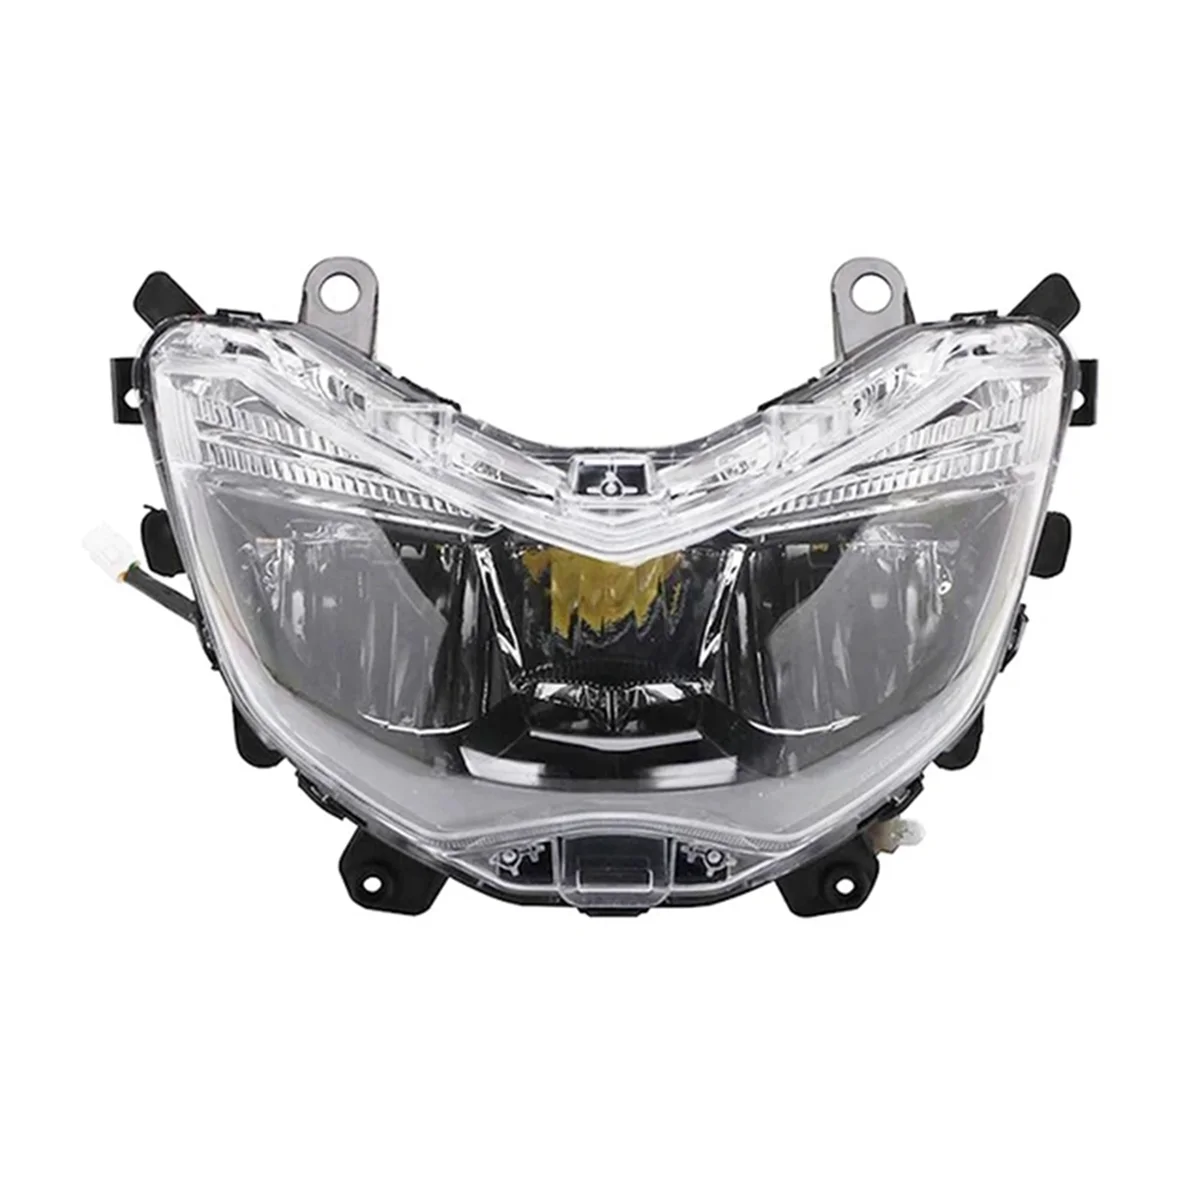 

Fit for Yamaha NMAX155 NMAX125 2016-2018 Motorcycle HeadLight Assembly Head Light Lamp Head Light